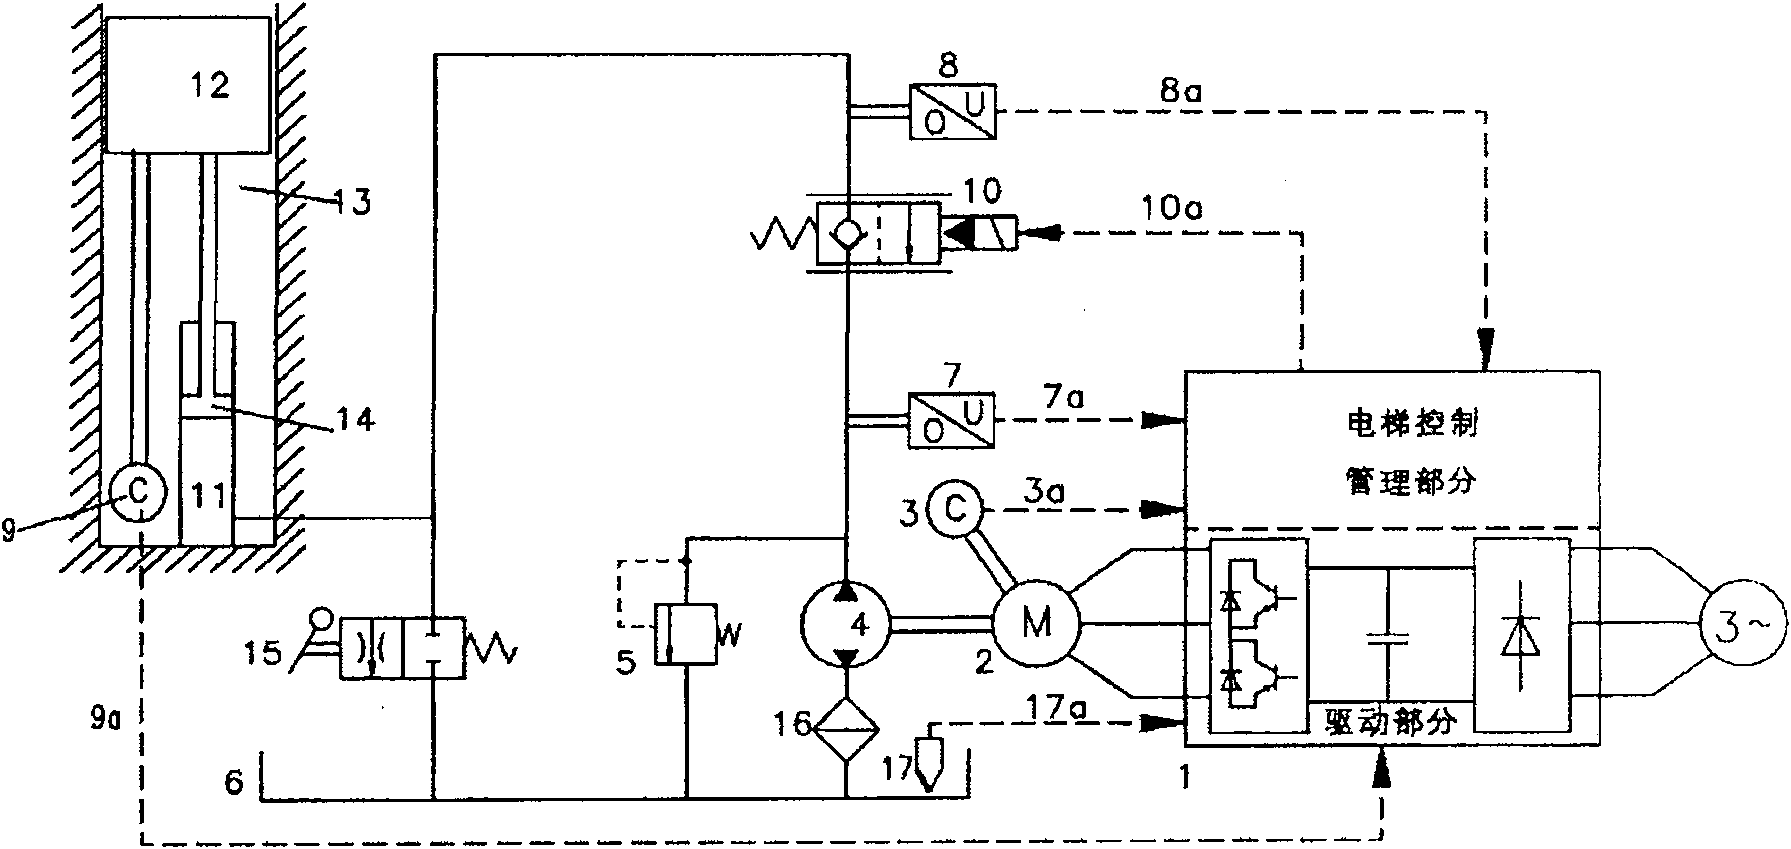 Frequency-changing hydraulic elevator system